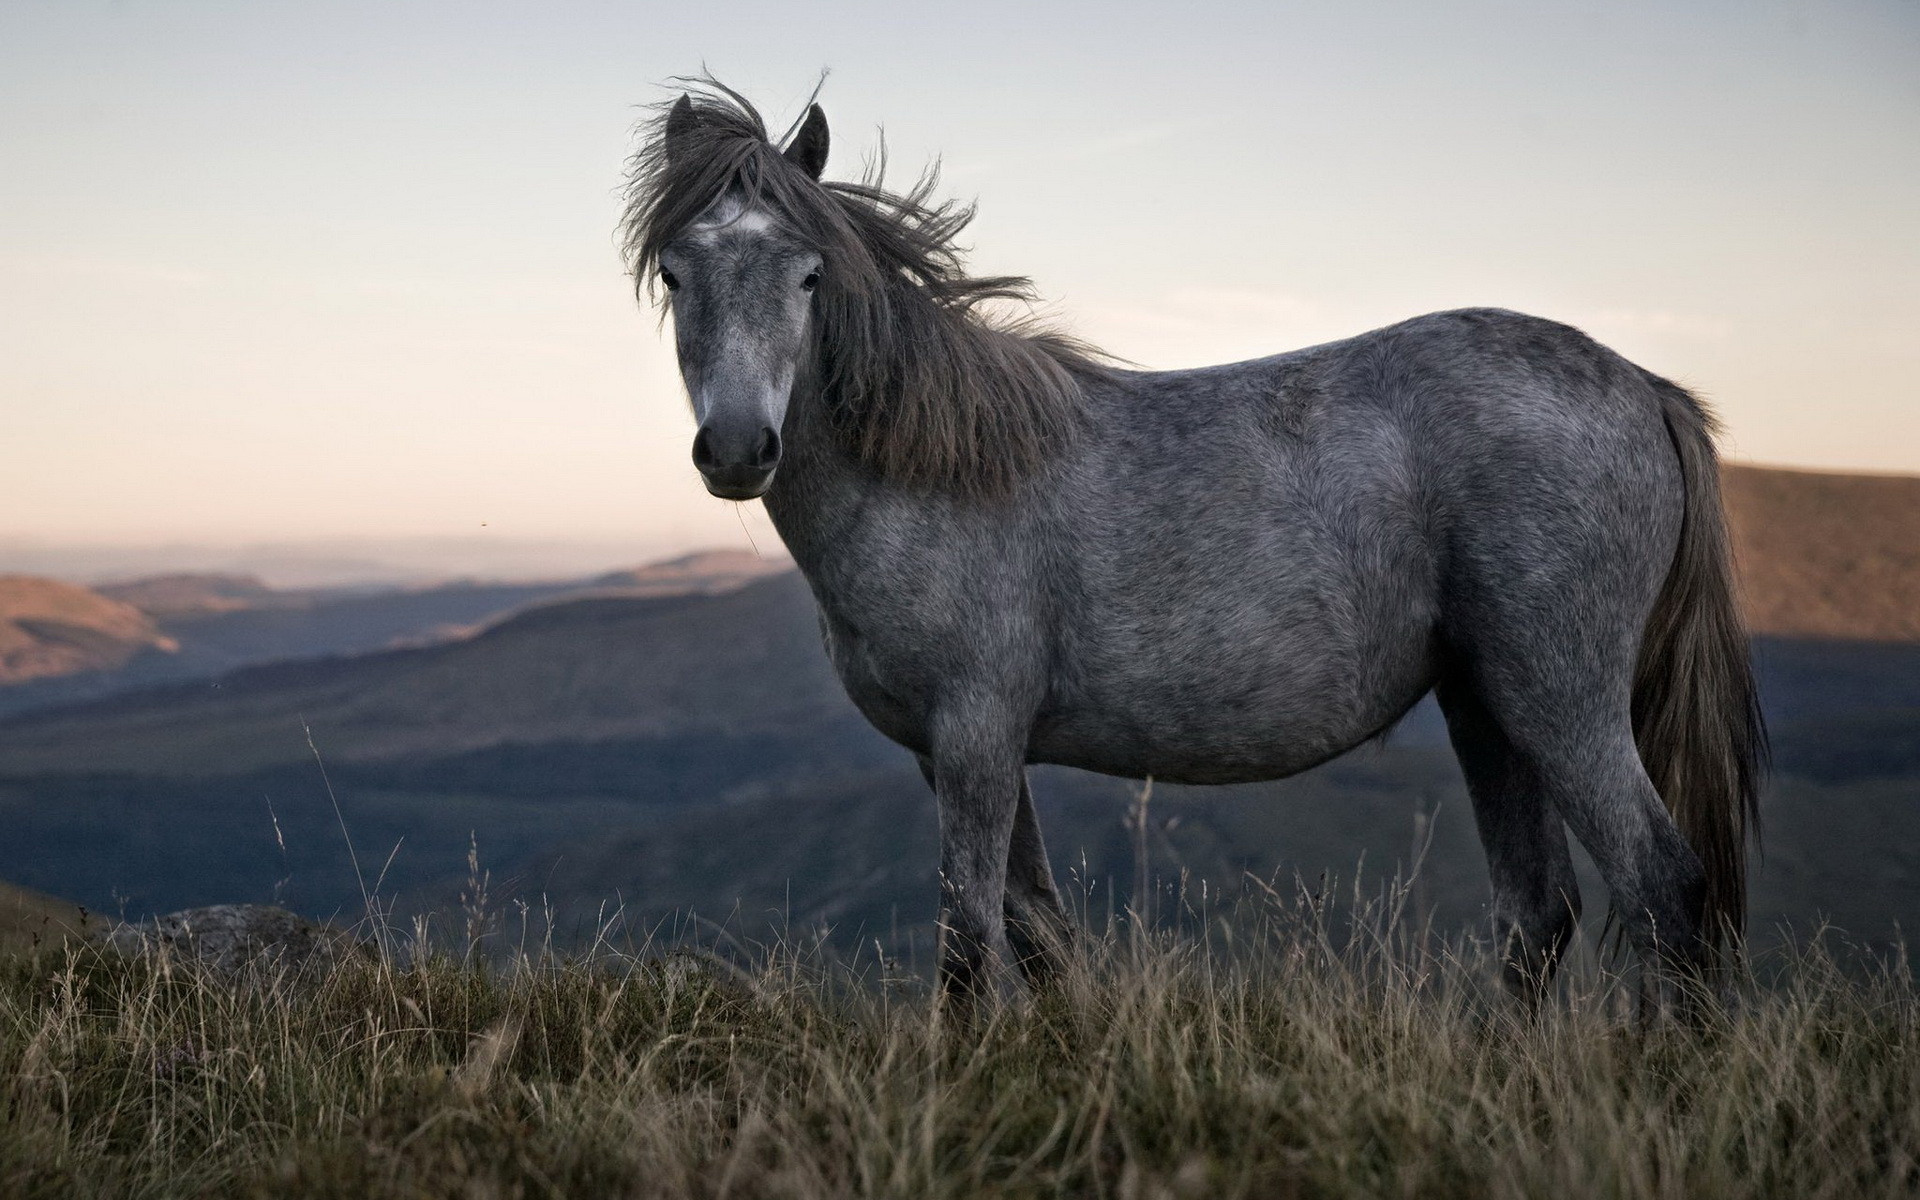 Lonely Horse wallpapers and images - wallpapers, pictures, photos